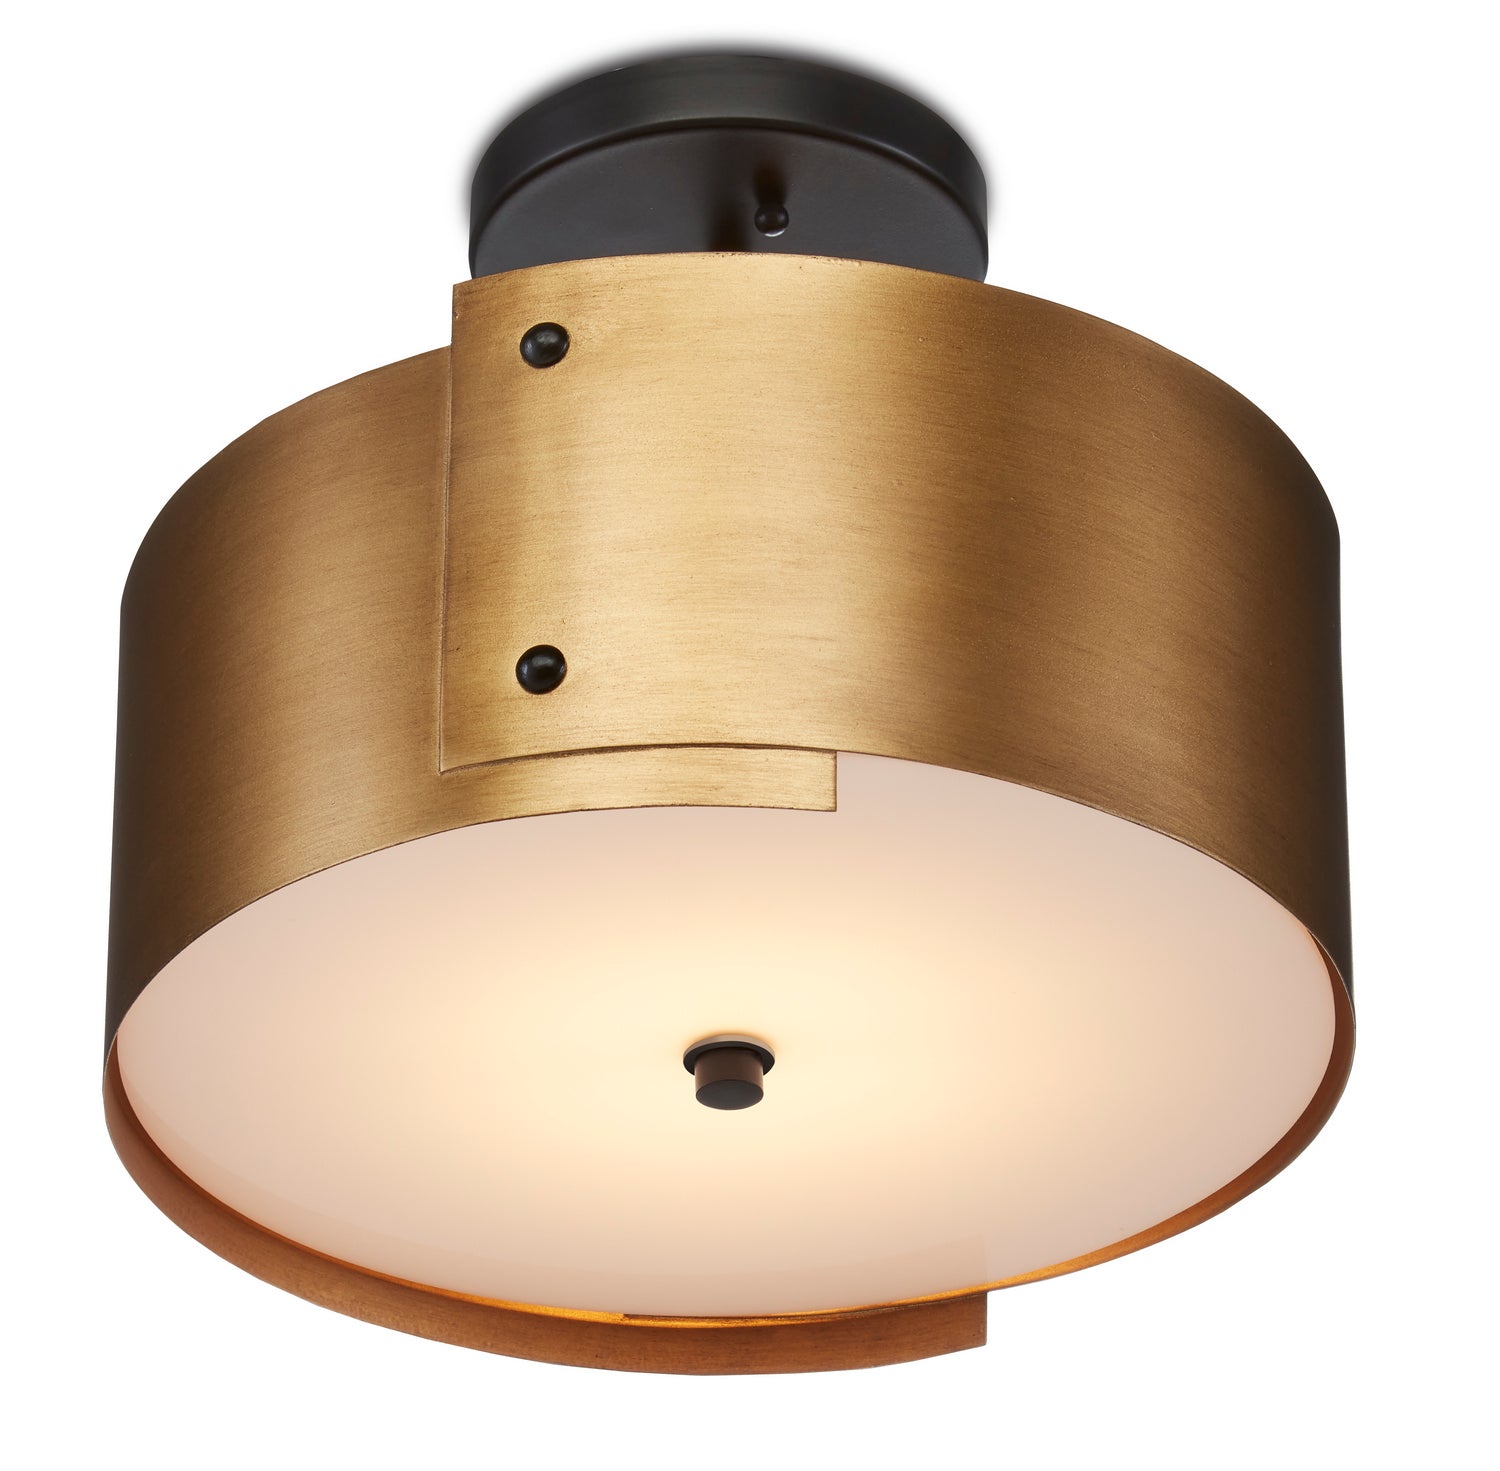 One Light Semi-Flush Mount from the Ritsu collection in Antique Brass/Black finish